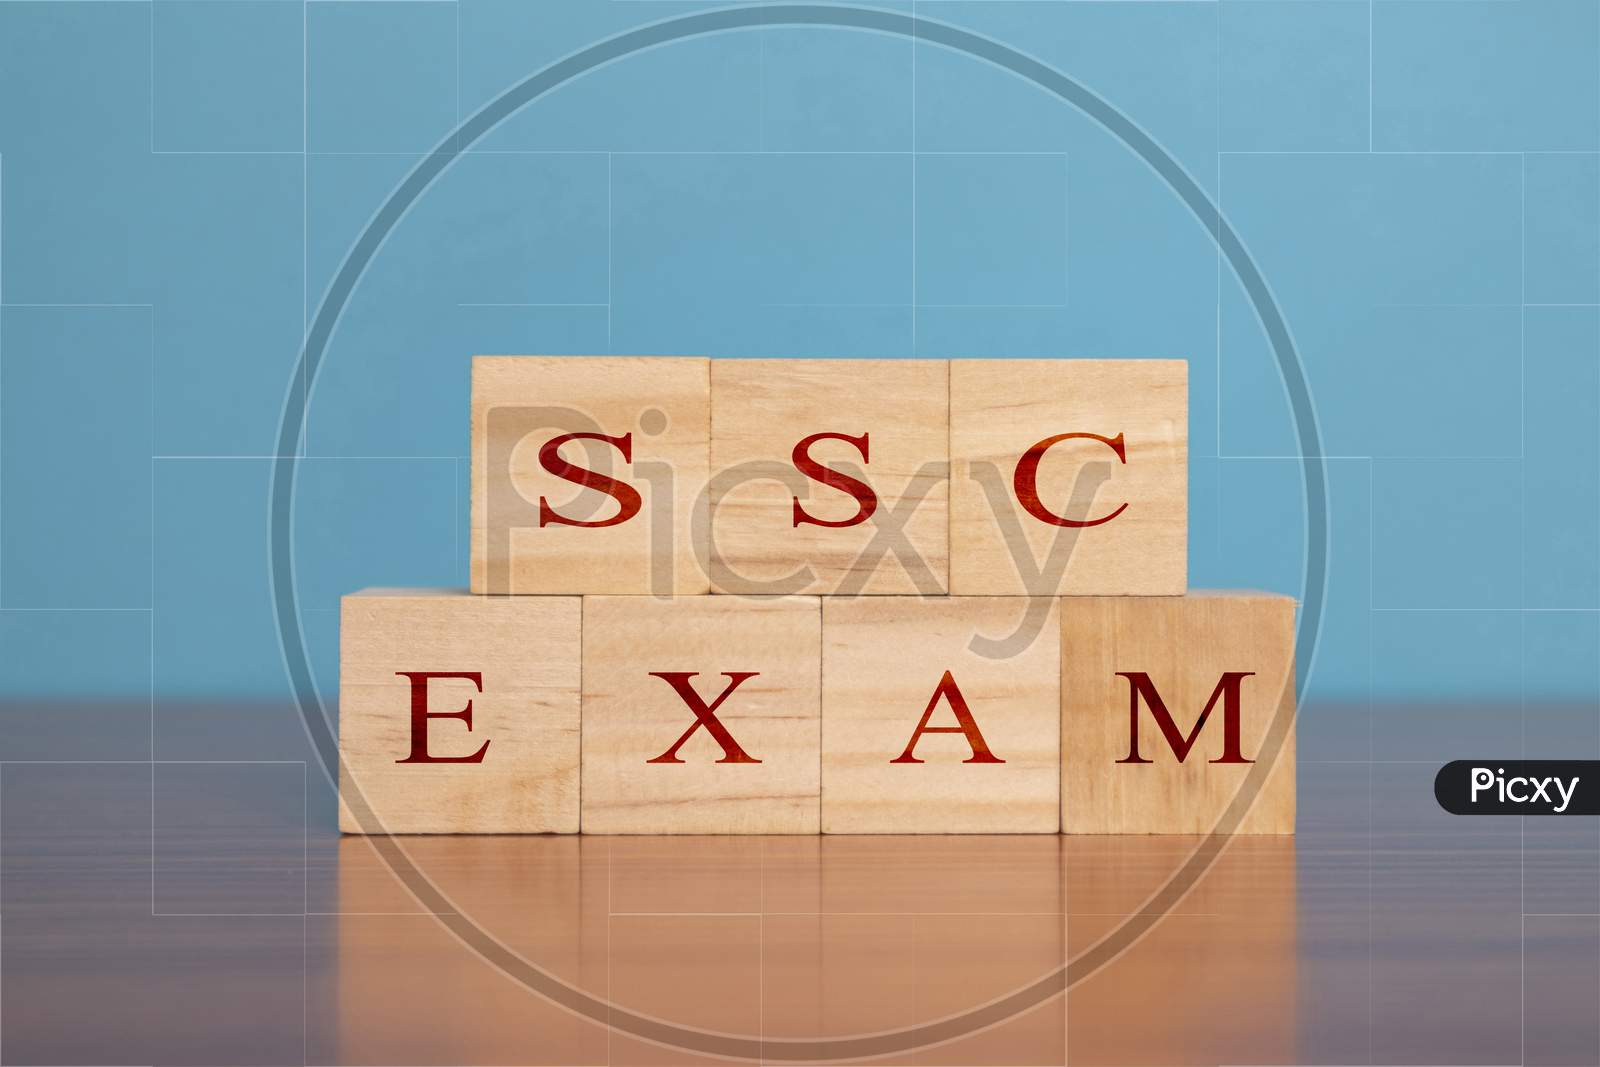 Concept Of Ssc Or Staff Selection Commission Exam For Recruit Staff To Various Posts In Ministries, Departments And Organisations Of The Government Of India.